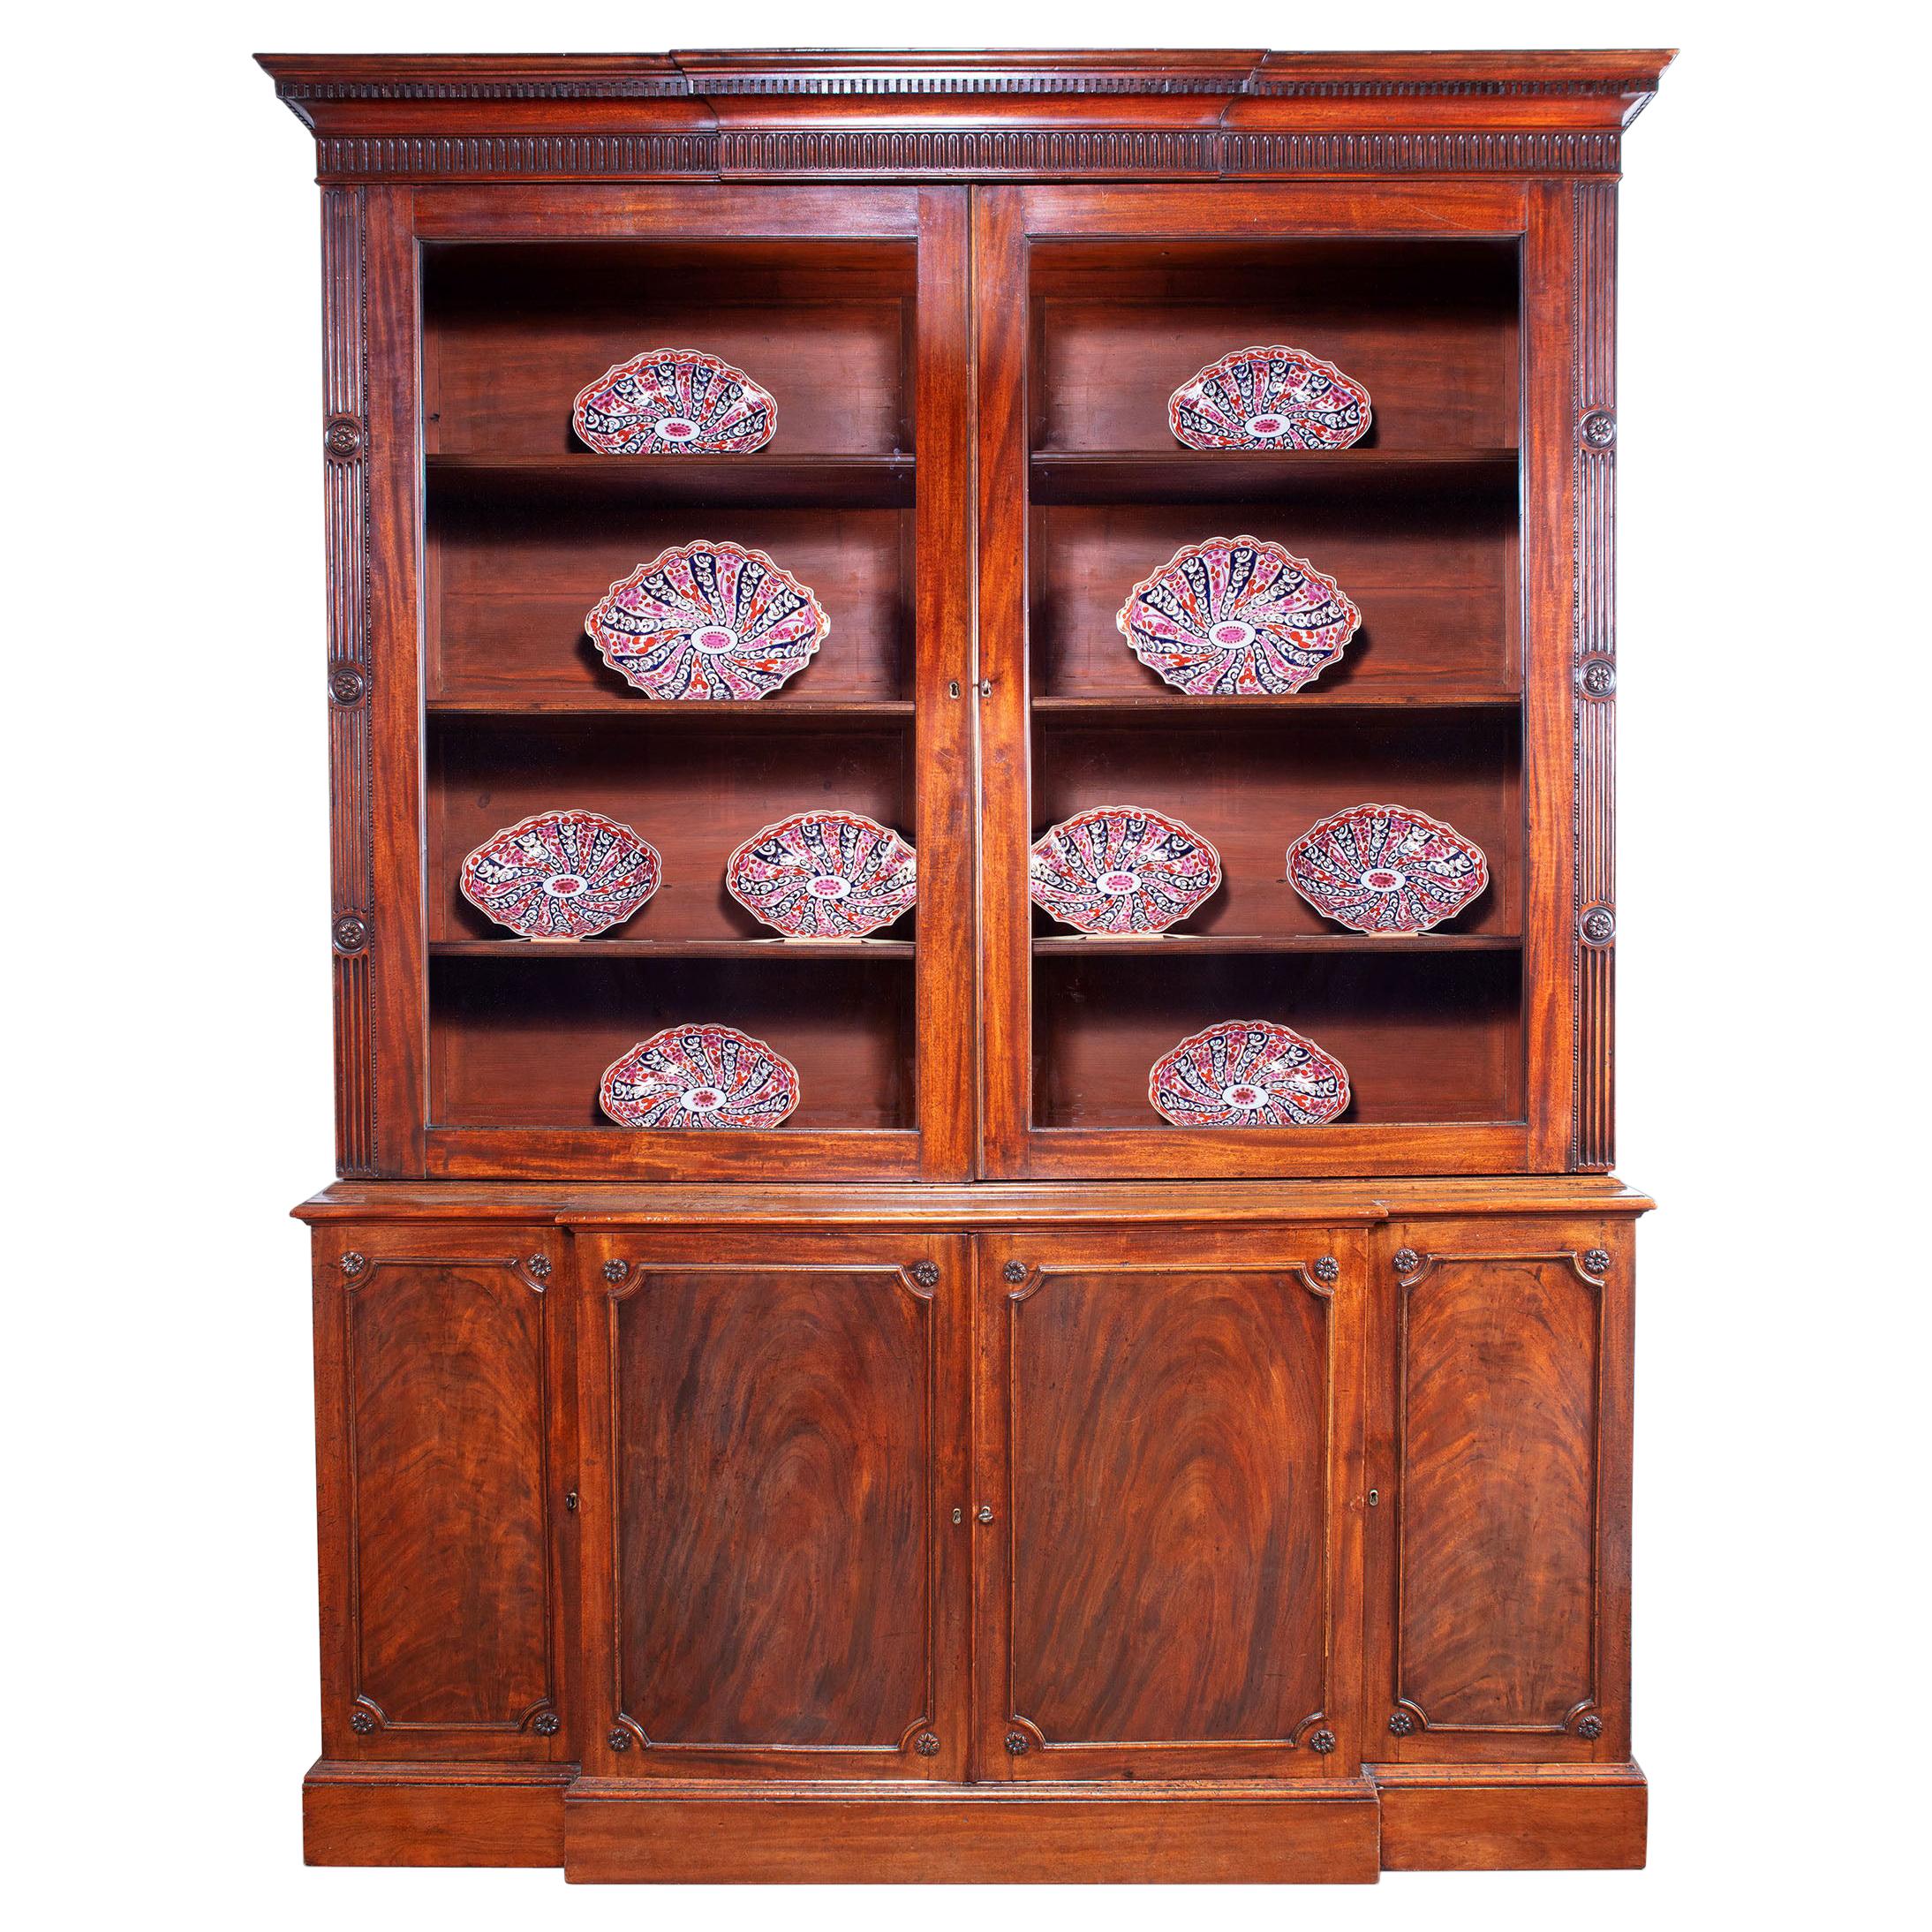 George III Chippendale Period Mahogany Breakfront Bookcase